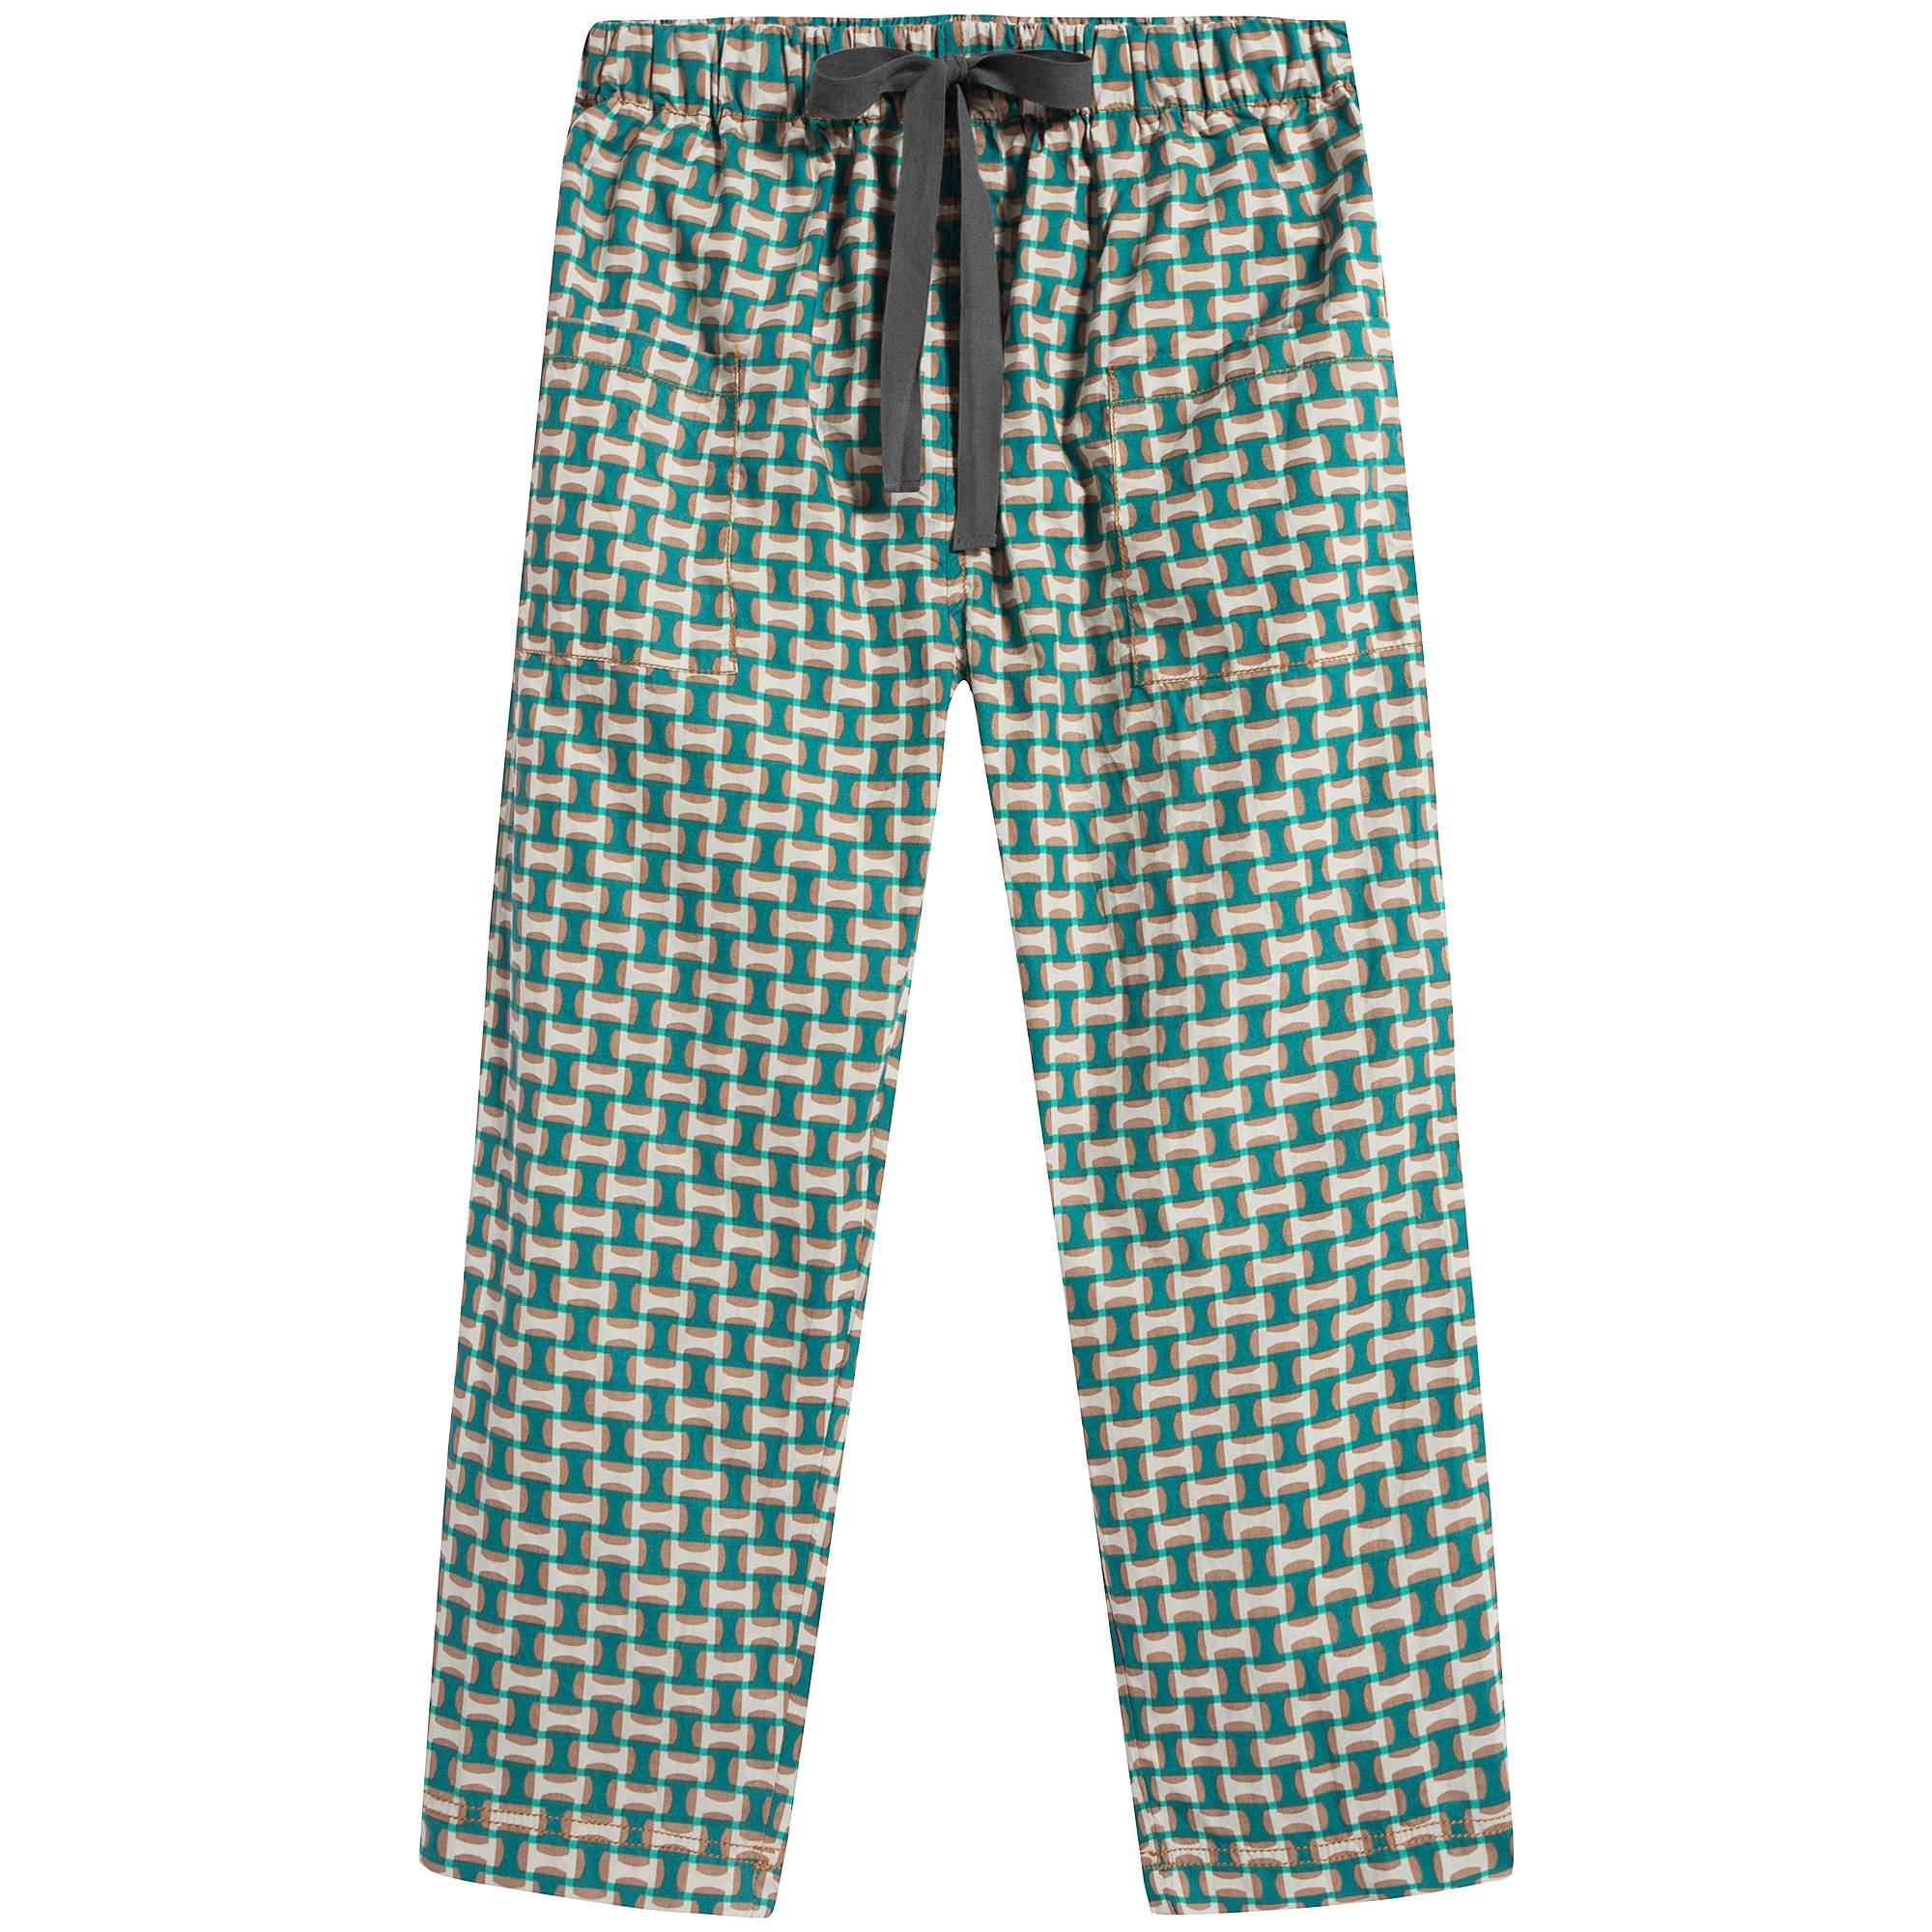 Girls Emerald Prlnt Cotton Trousers